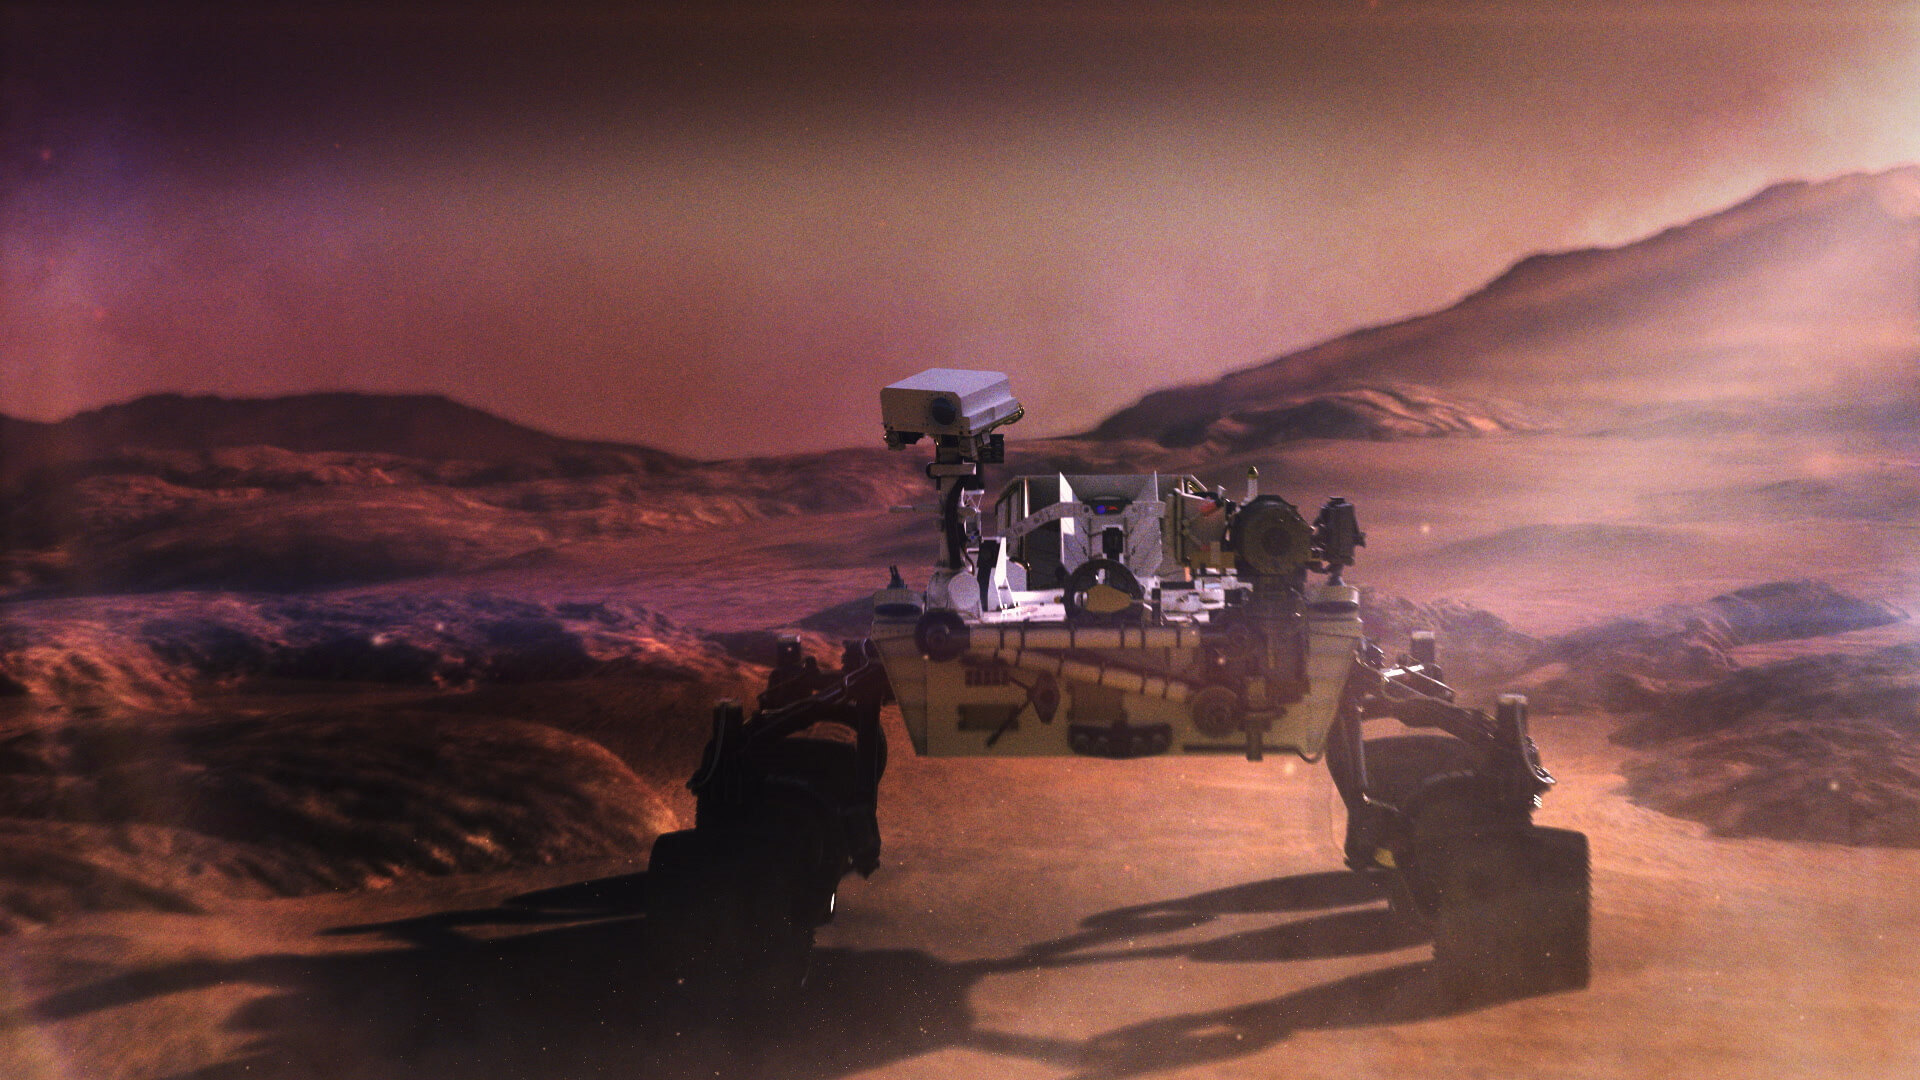 Still from Peraton TVC depicting a craft moving across land of another planet created using VFX by VANDAL